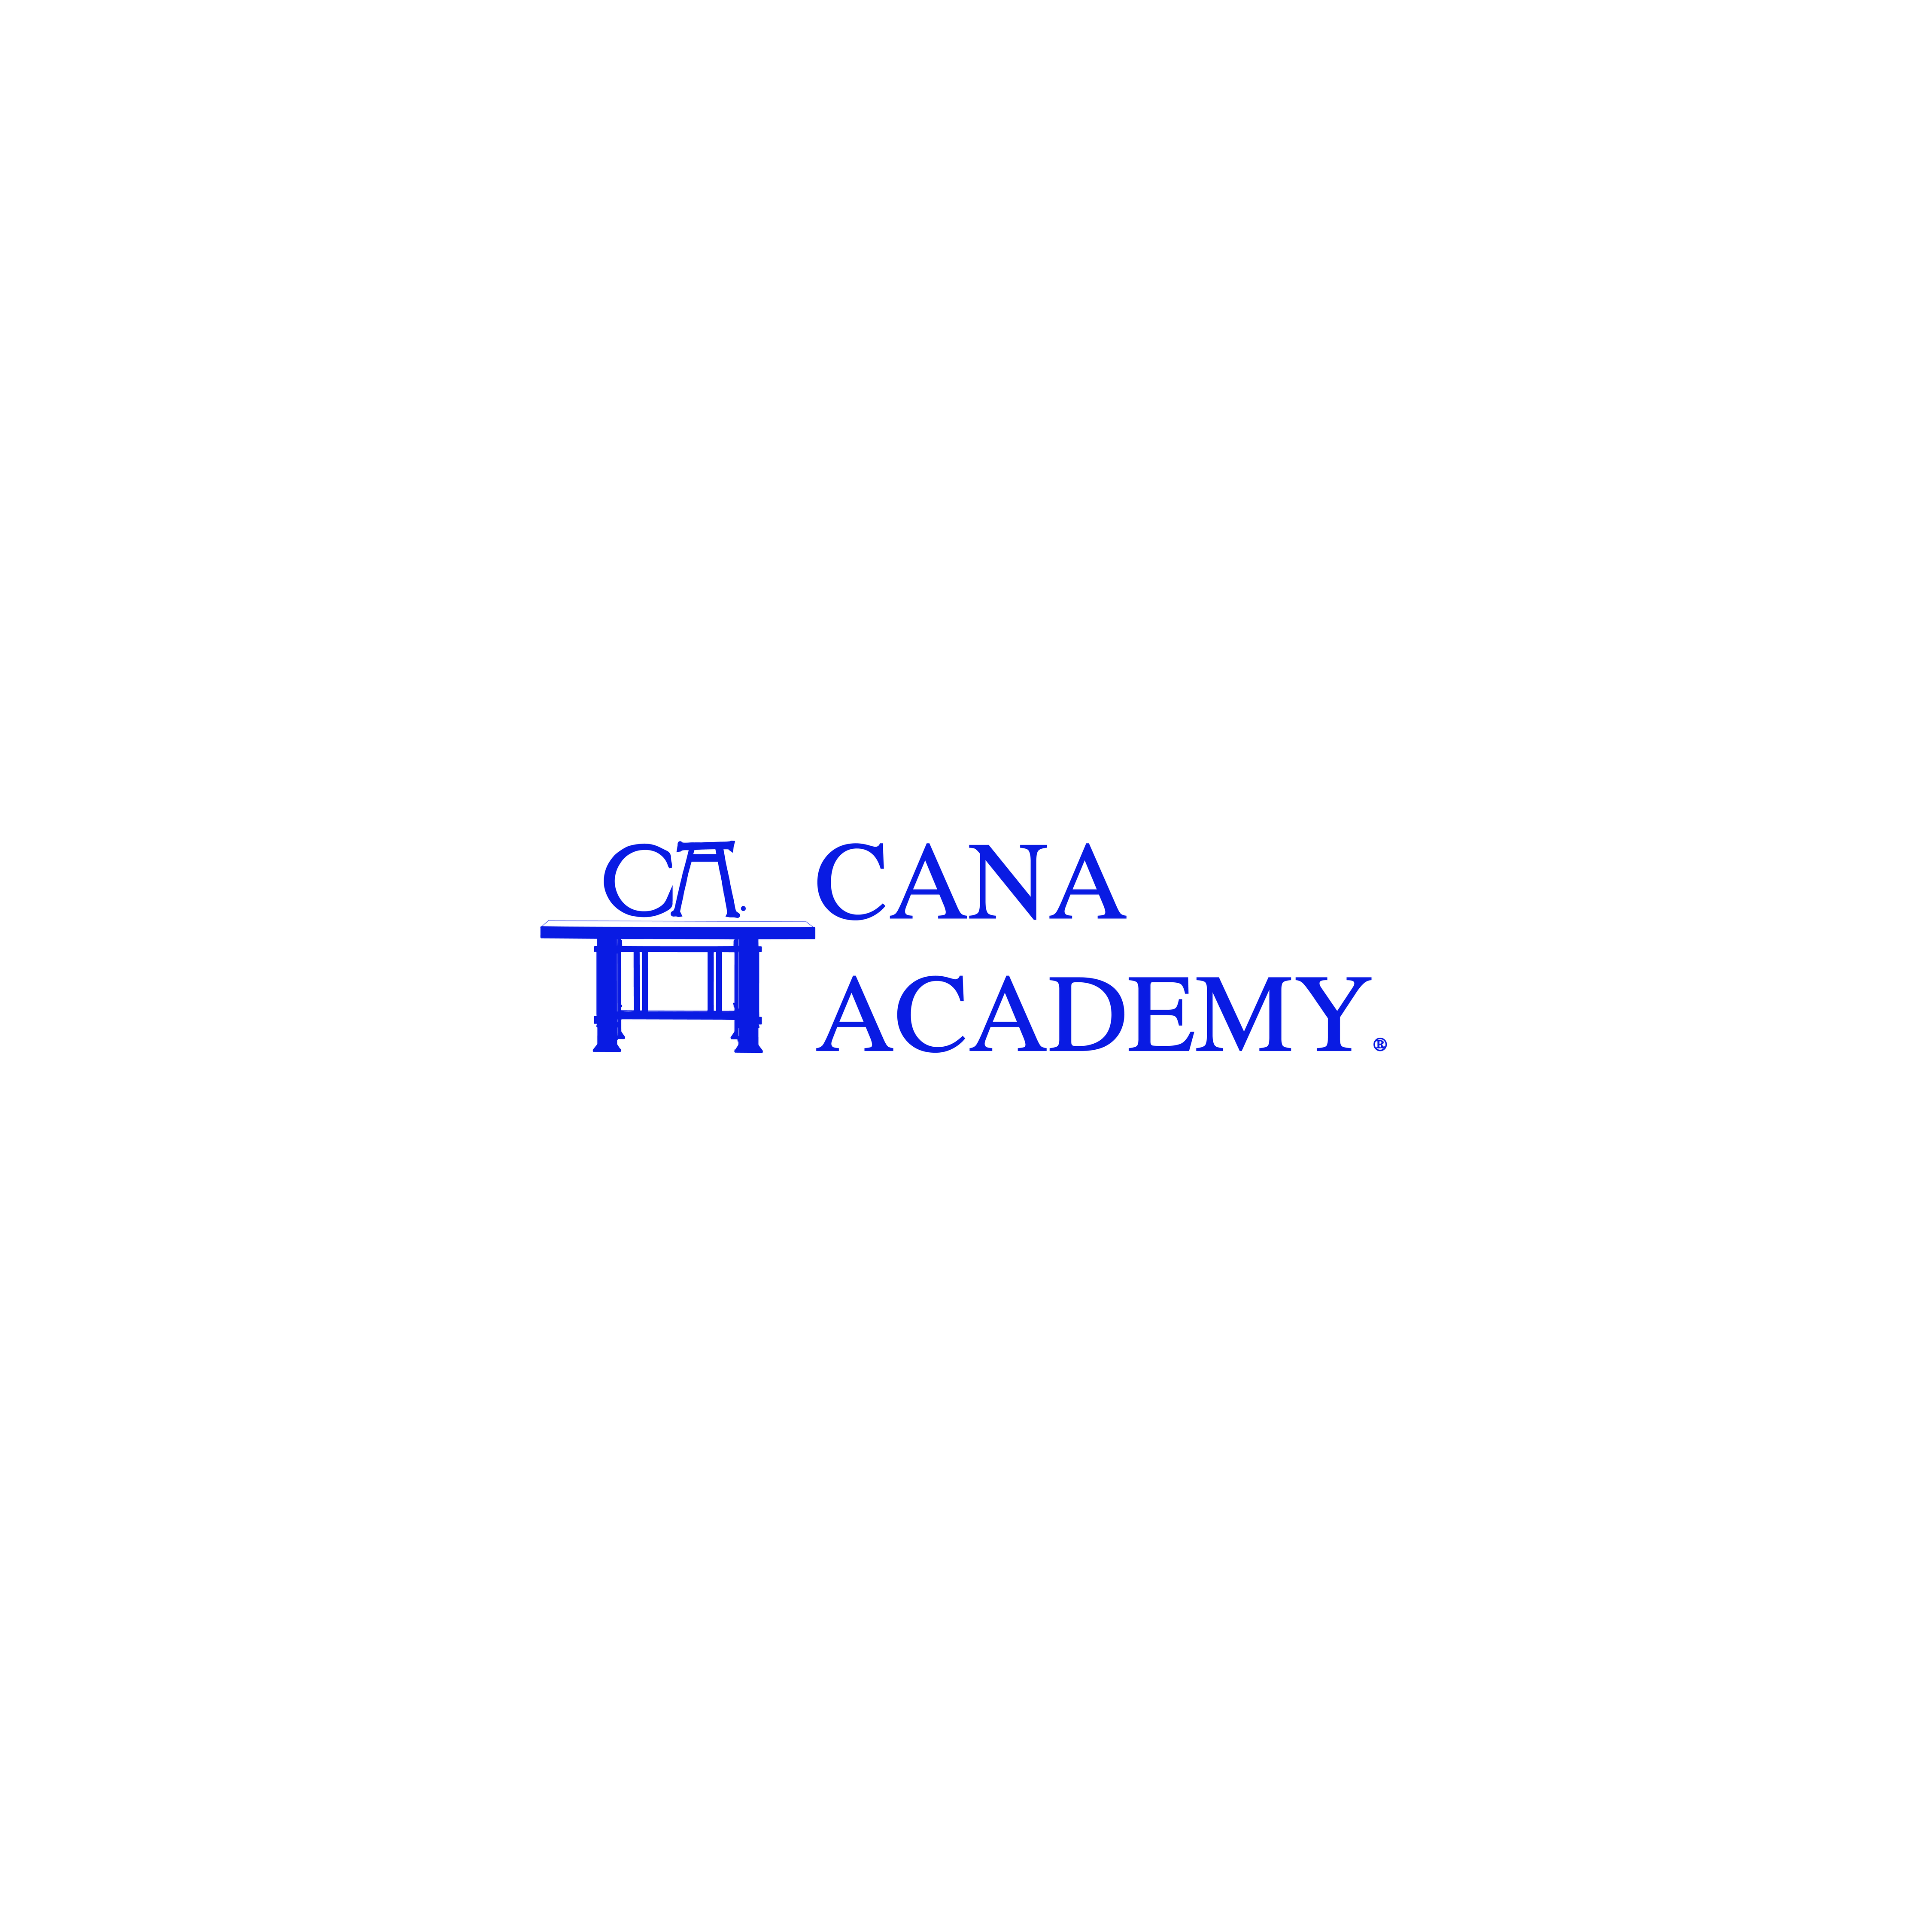 https://classicaleducationsymposium.org/wp-content/uploads/2022/03/CANA-Academy_resized.png